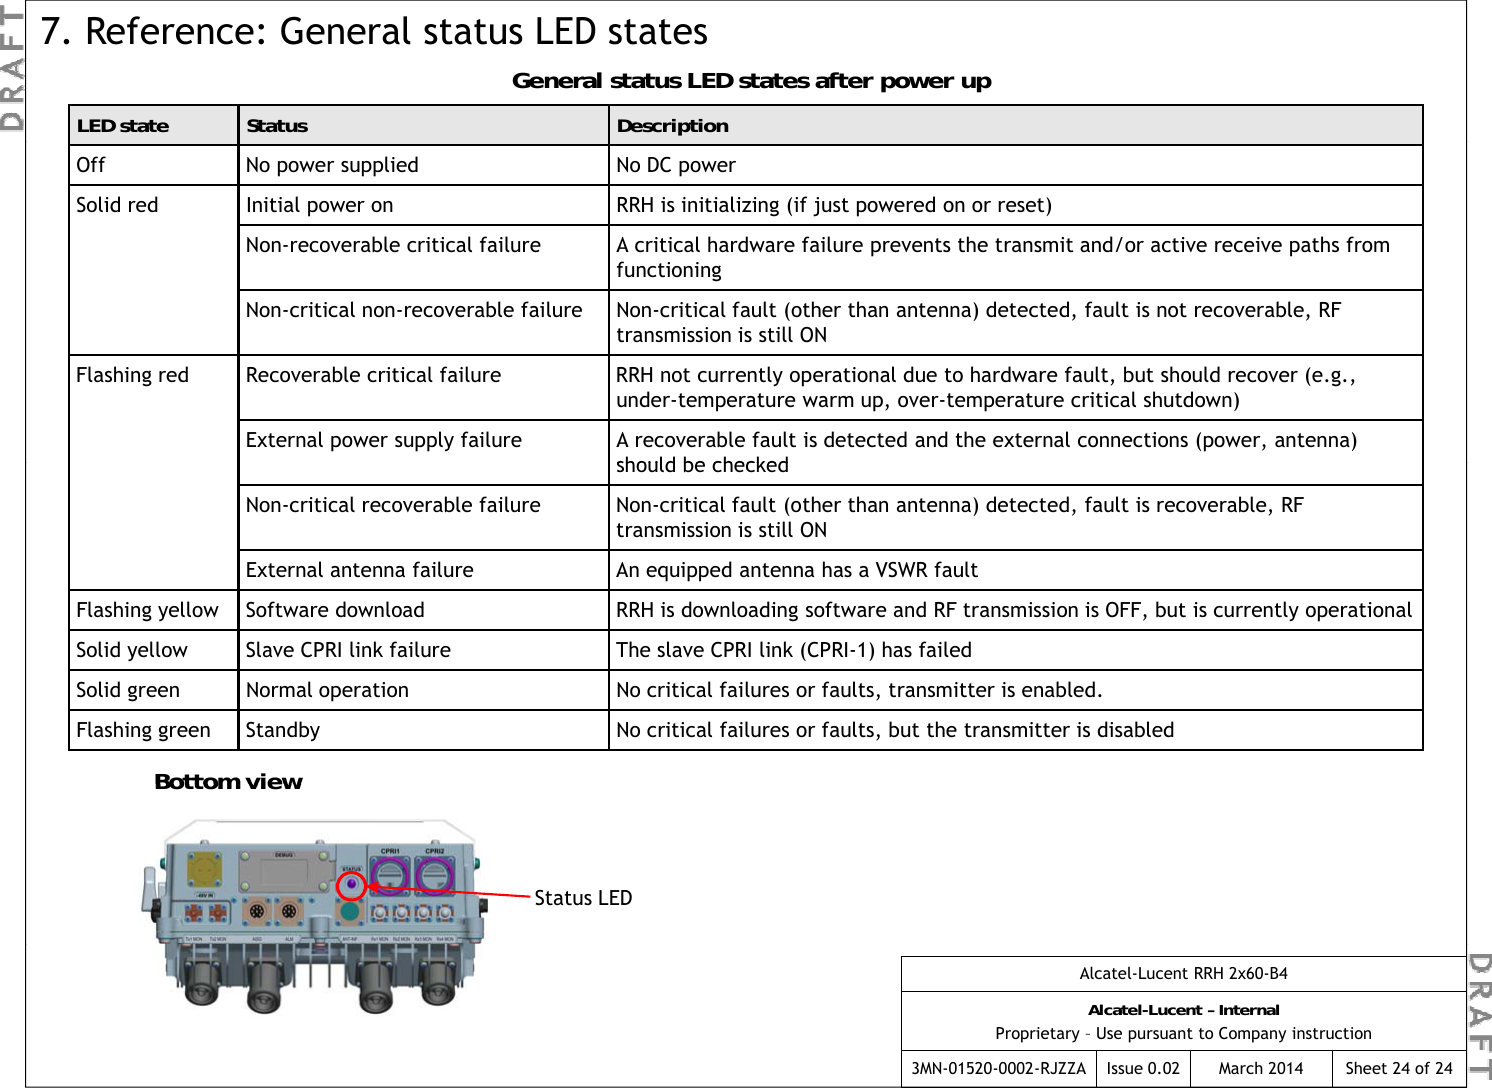 LED state Status DescriptionGeneral status LED states after power up7. Reference: General status LED statesOff No power supplied No DC powerSolid red Initial power on RRH is initializing (if just powered on or reset)Non-recoverable critical failure A critical hardware failure prevents the transmit and/or active receive paths from functioninglbl f llf l h h d d f l blNon-critical non-recoverable failure Non-critical fault (other than antenna) detected, fault is not recoverable, RF transmission is still ONFlashing red Recoverable critical failure RRH not currently operational due to hardware fault, but should recover (e.g., under-temperature warm up, over-temperature critical shutdown)External power supply failure A recoverable fault is detected and the external connections (power, antenna) should be checkedshould be checkedNon-critical recoverable failure Non-critical fault (other than antenna) detected, fault is recoverable, RFtransmission is still ONExternal antenna failure An equipped antenna has a VSWR faultFlashing yellow Software download RRH is downloading software and RF transmission is OFF, but is currently operationalSolid yellow Slave CPRI link failure The slave CPRI link (CPRI-1) has failedSolid green Normal operation No critical failures or faults, transmitter is enabled.Flashing green Standby No critical failures or faults, but the transmitter is disabledBottom view Bottom view Status LEDAlcatel-Lucent RRH 2x60-B4Alcatel-Lucent – InternalProprietary – Use pursuant to Company instruction3MN-01520-0002-RJZZA Issue 0.02 March 2014 Sheet 24 of 24